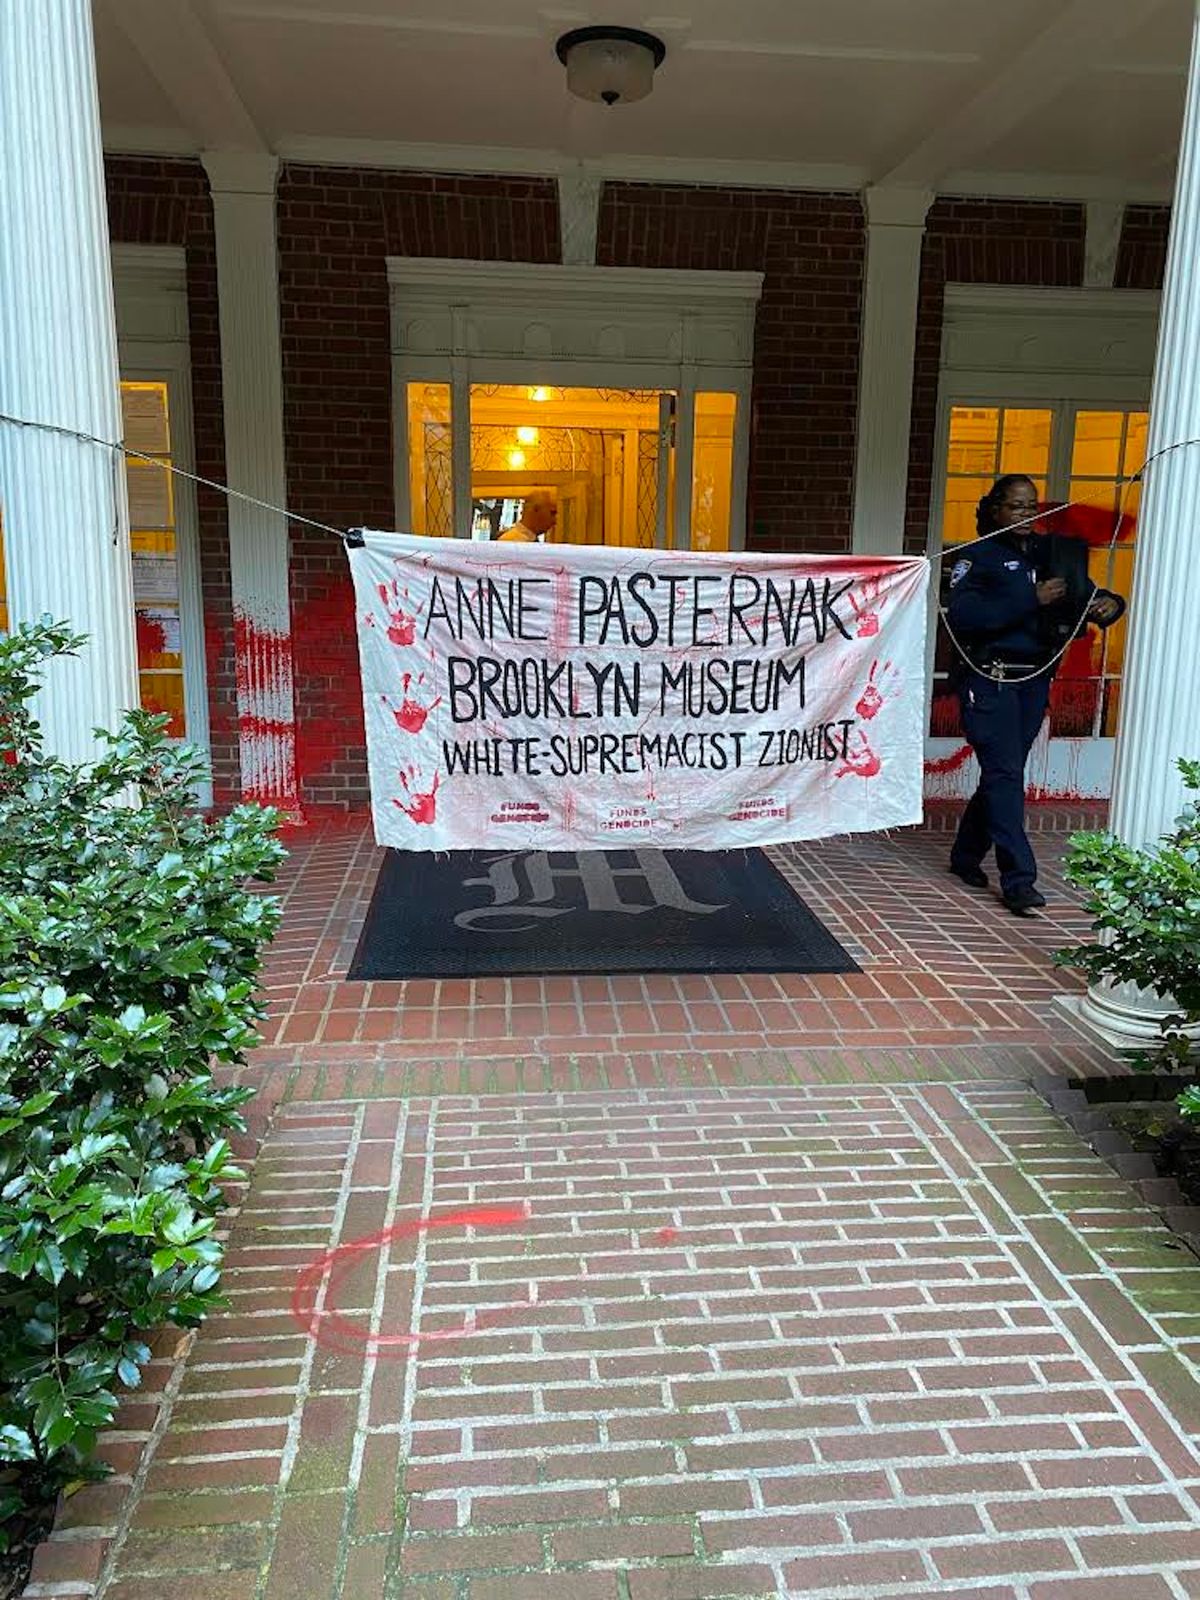 The exterior of Anne Pasternak's apartment building in Brooklyn Heights, where activists hung a banner and splashed red paint on the evening of 11 June Photo by New York city council member Lincoln Restler, via X